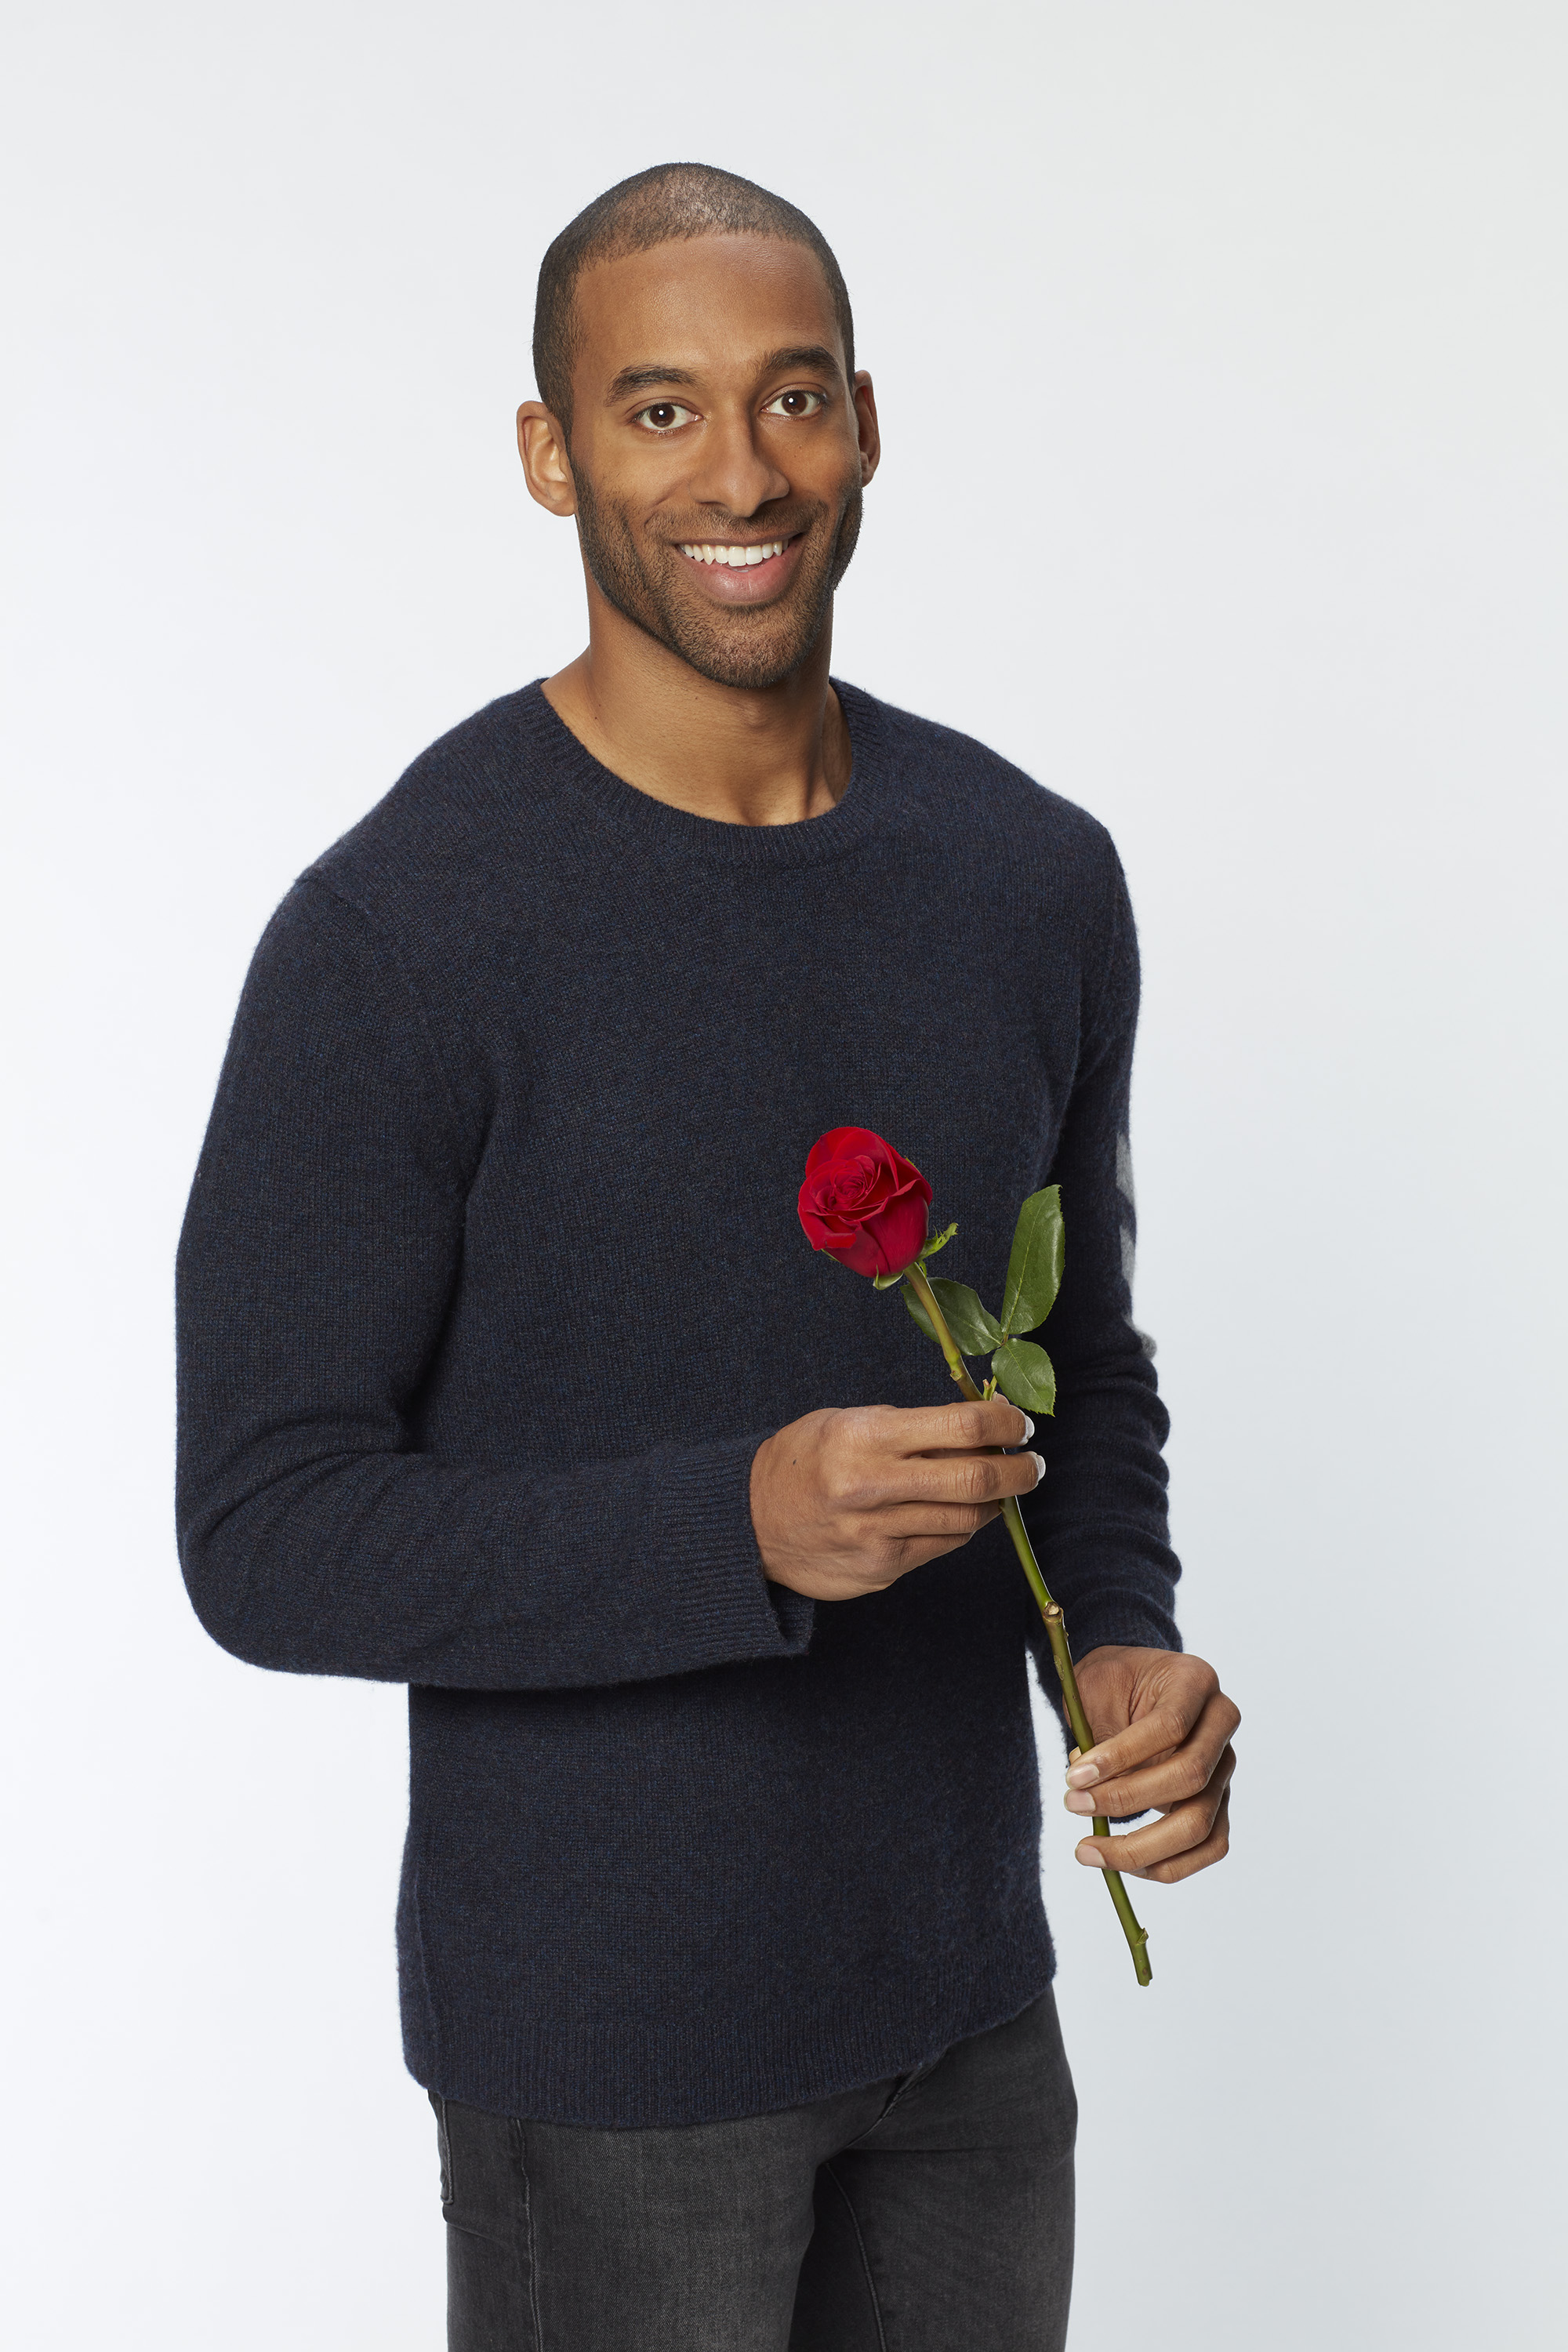 <p>In June 2020, ABC announced that real estate broker, entrepreneur and community organization founder Matt James would be the next star of "The Bachelor," making him <a href="https://www.wonderwall.com/entertainment/tv/icymi-the-week-in-tv-news-for-june-7-13-2020-358684.gallery?photoId=358721">the hit franchise's first Black leading man</a> when his season debuted in January 2021.</p>